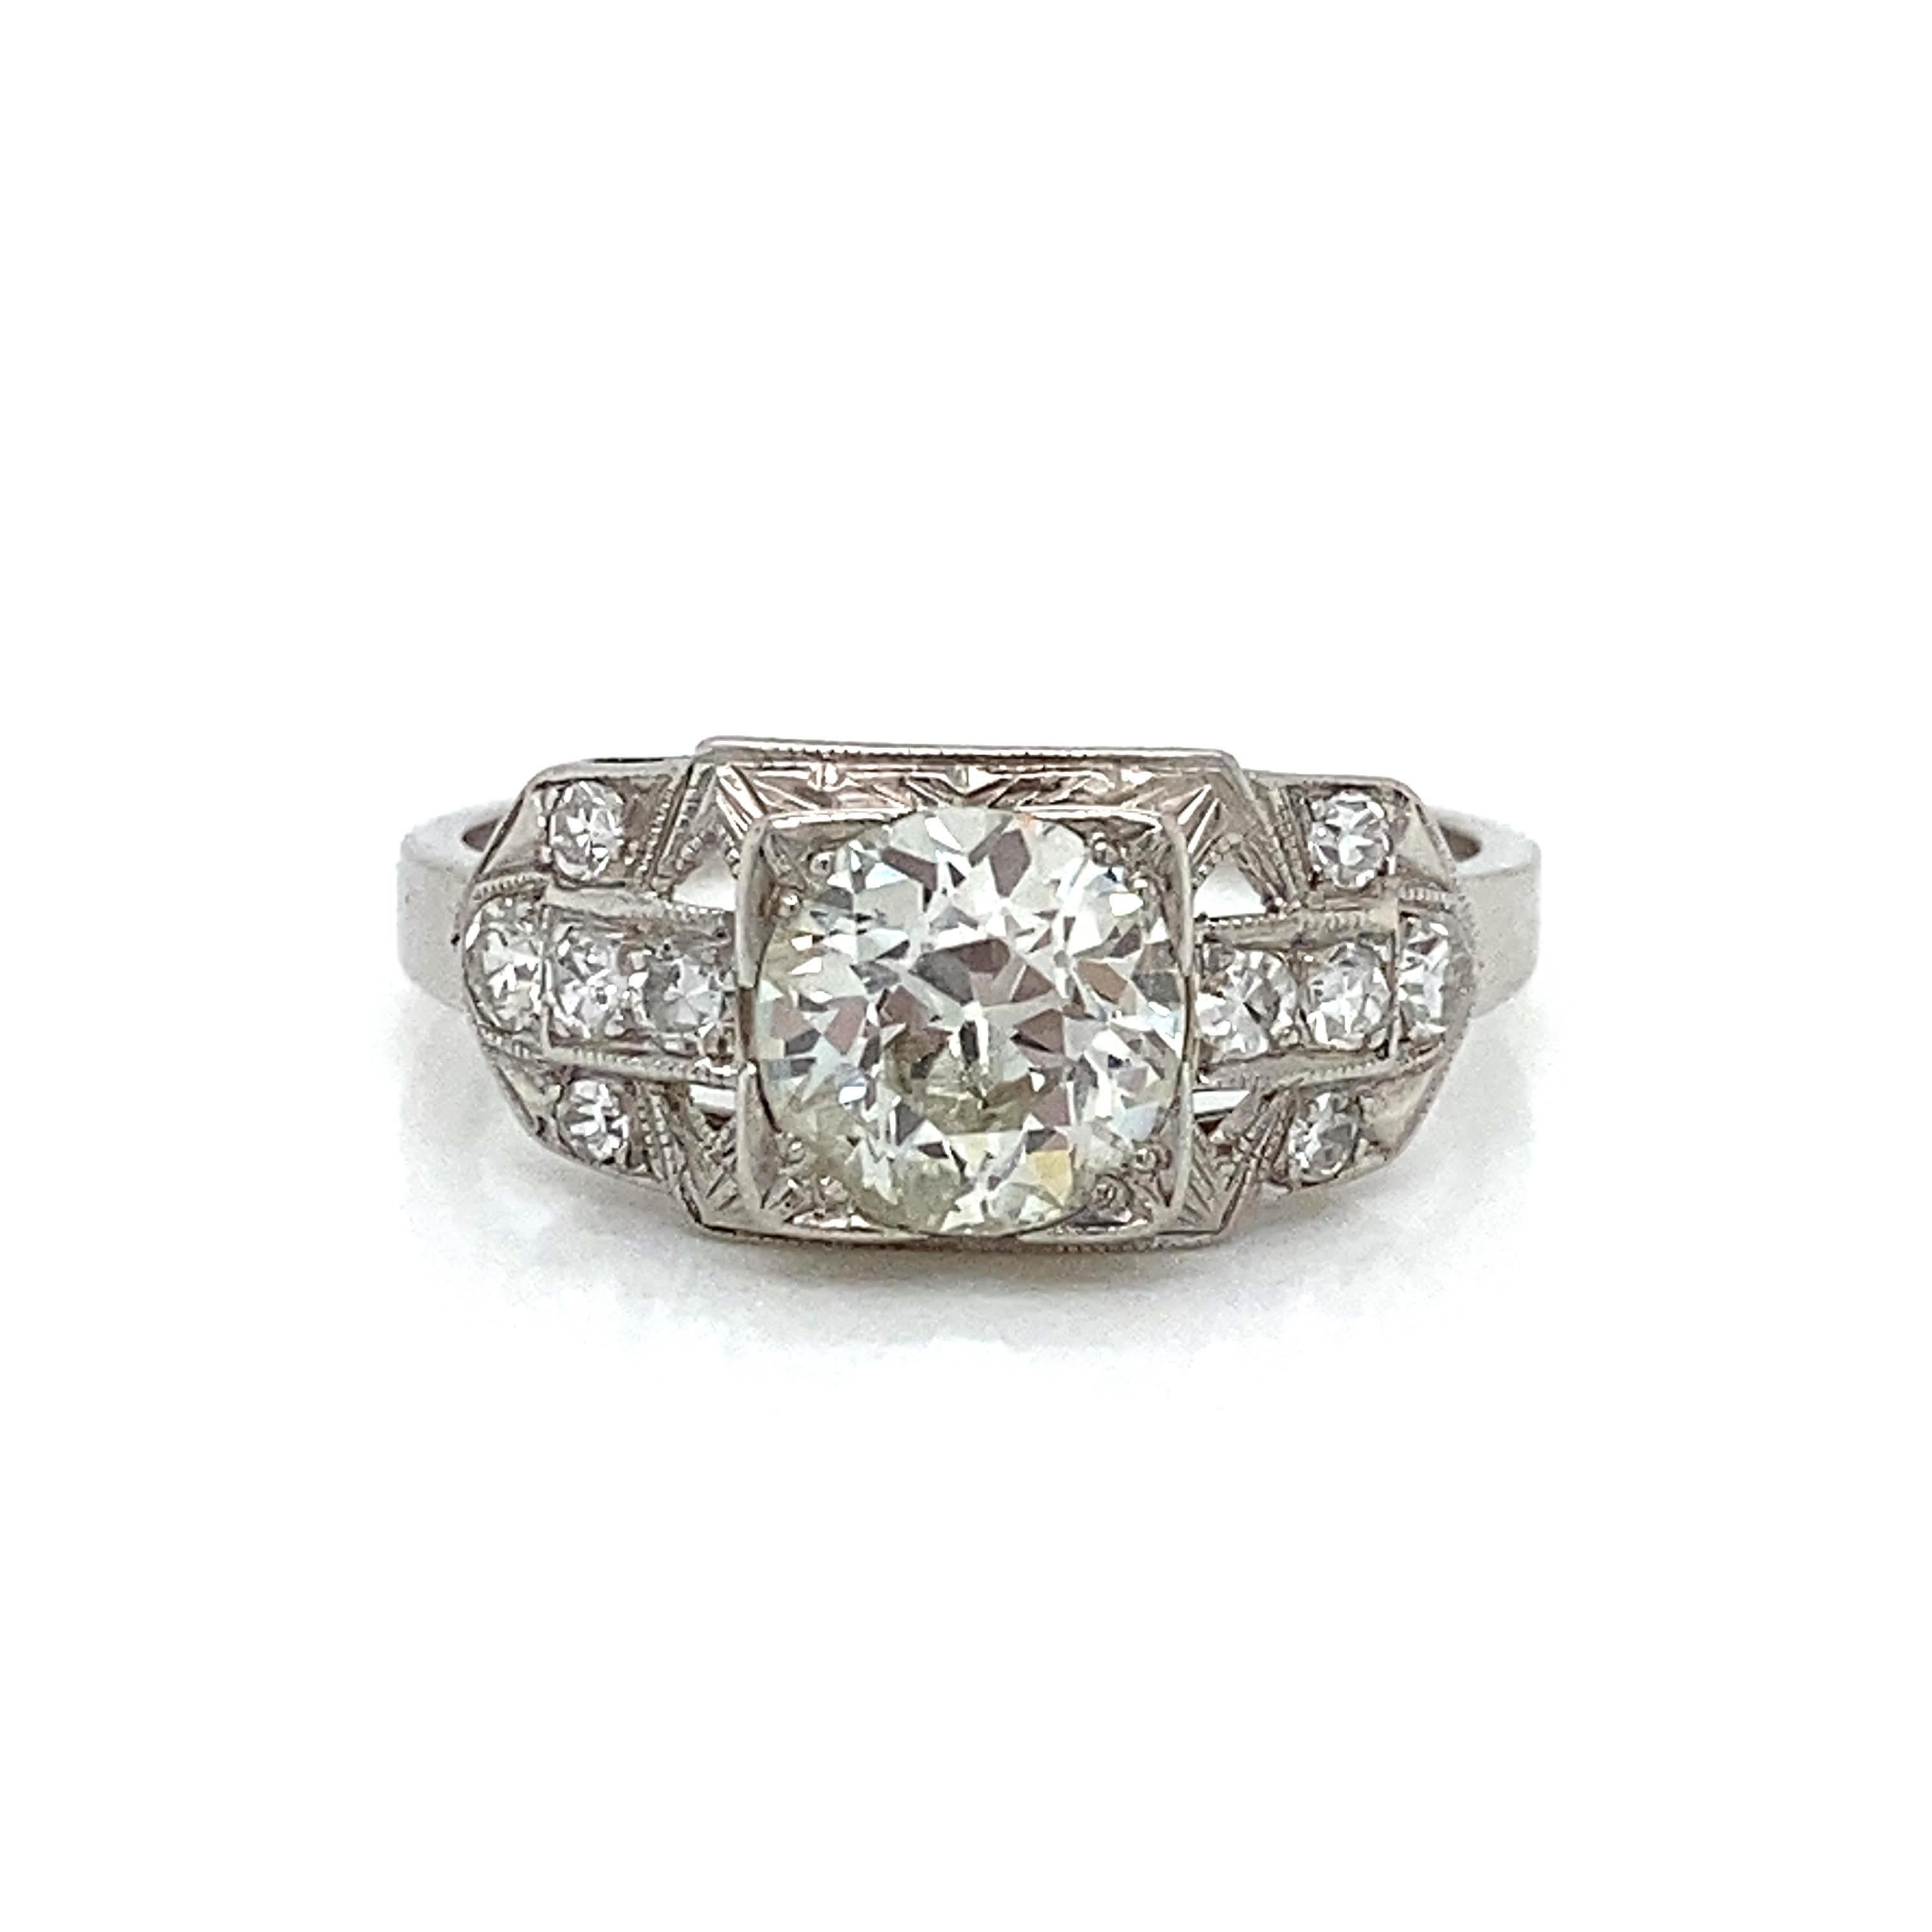 Vintage Art Deco Platinum Engagement Ring One 0.91ct Old European L VS2 In Good Condition For Sale In Newport Beach, CA